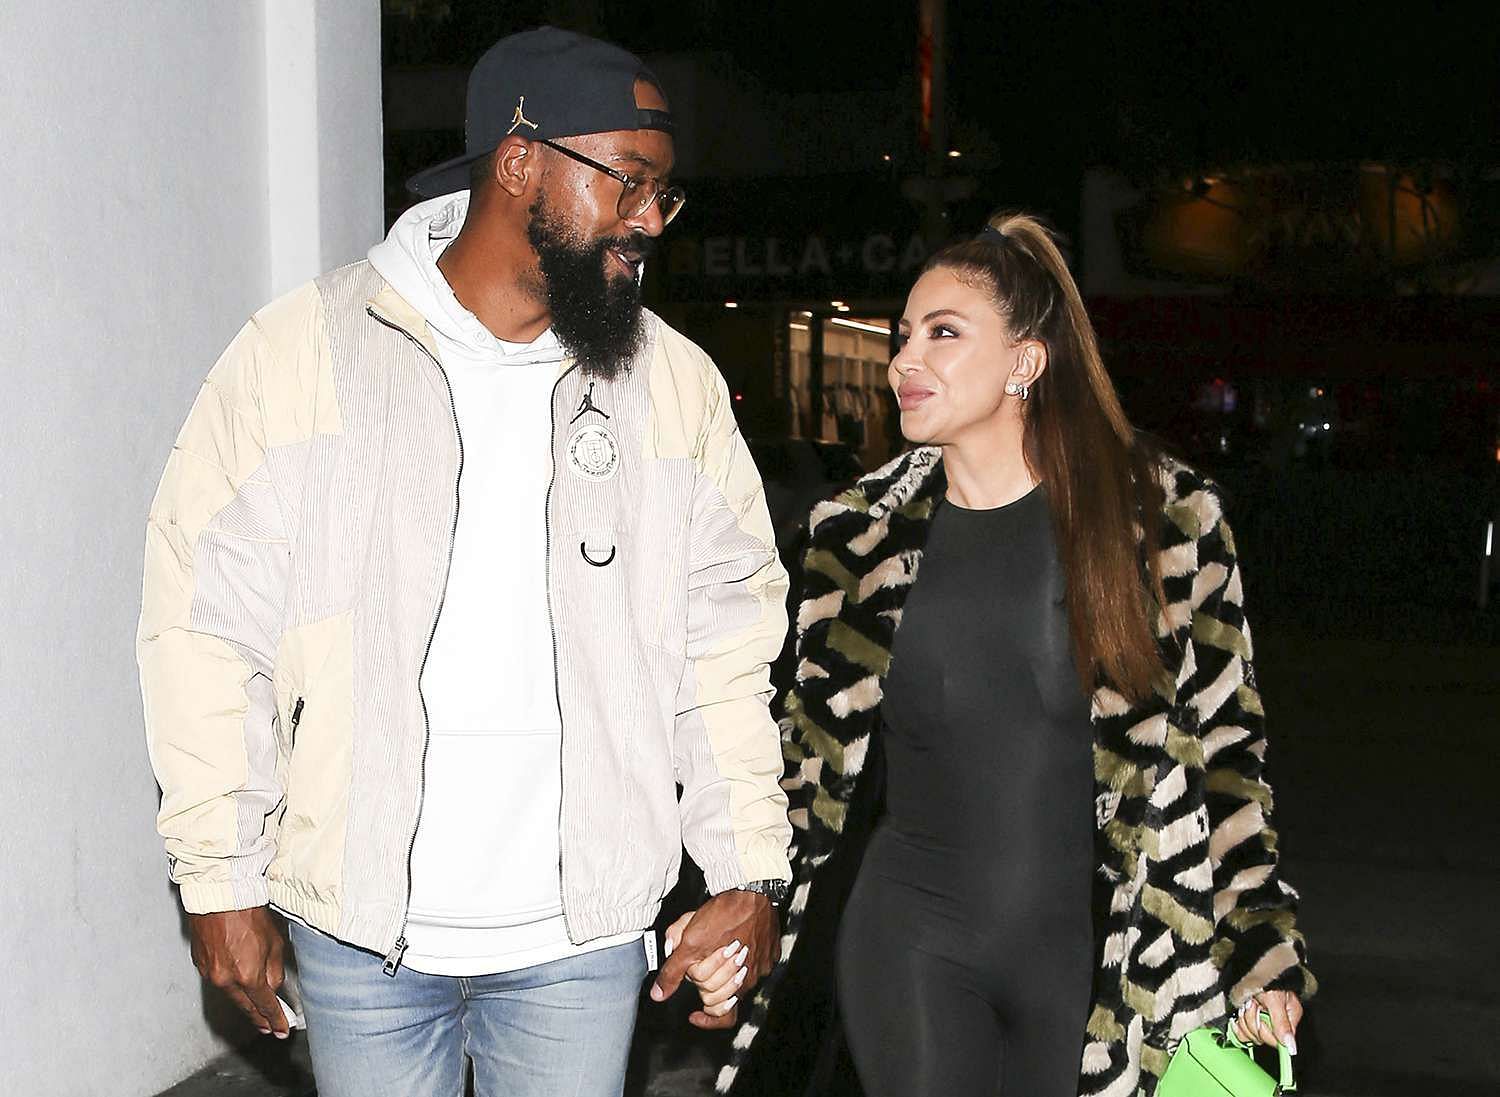 Larsa Pippen and Marcus Jordan spotted kissing